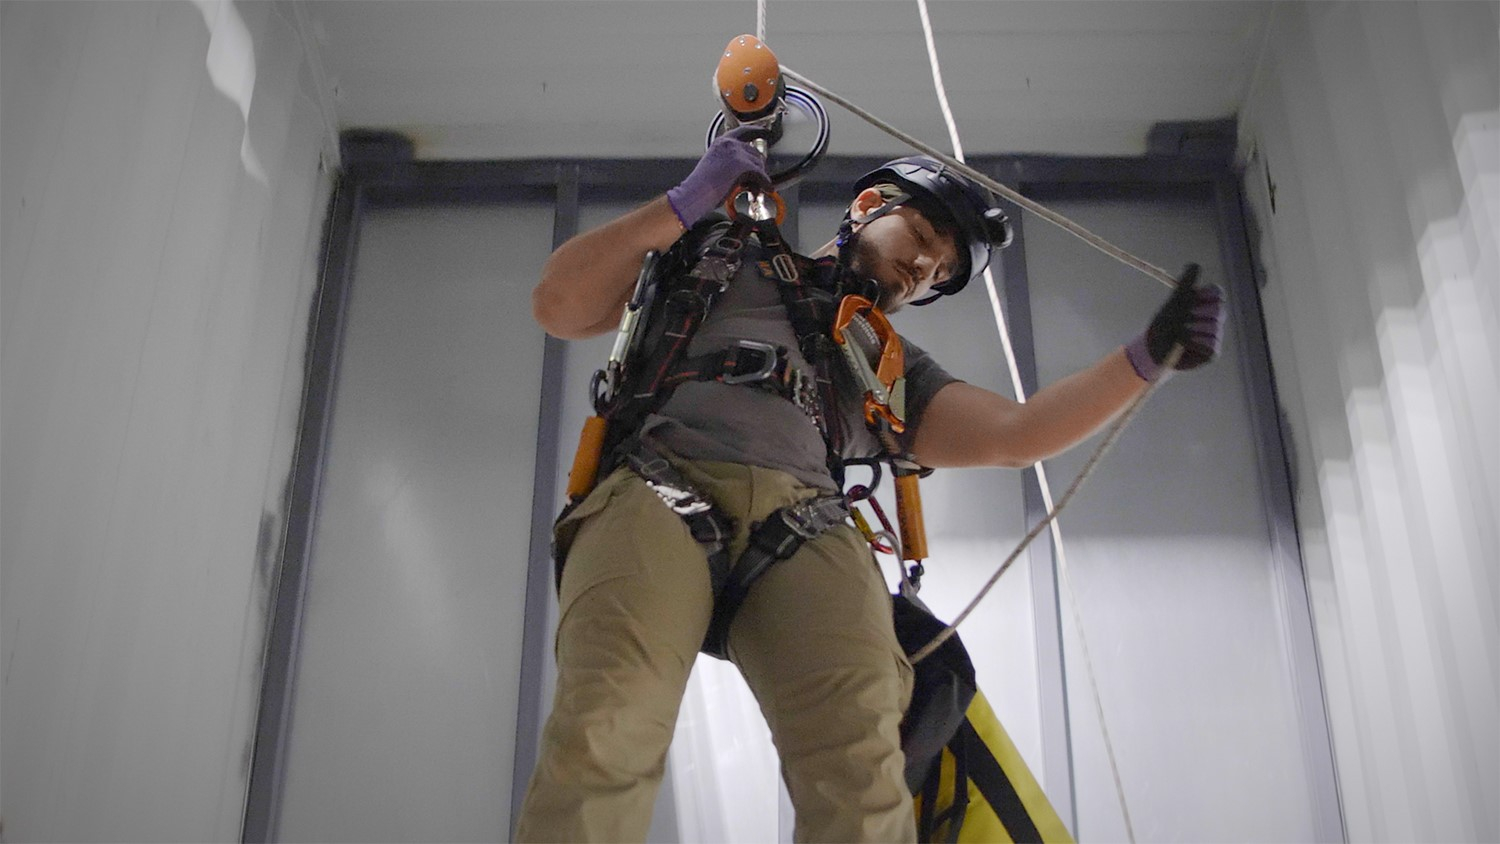 Man hanging in harness in training facility